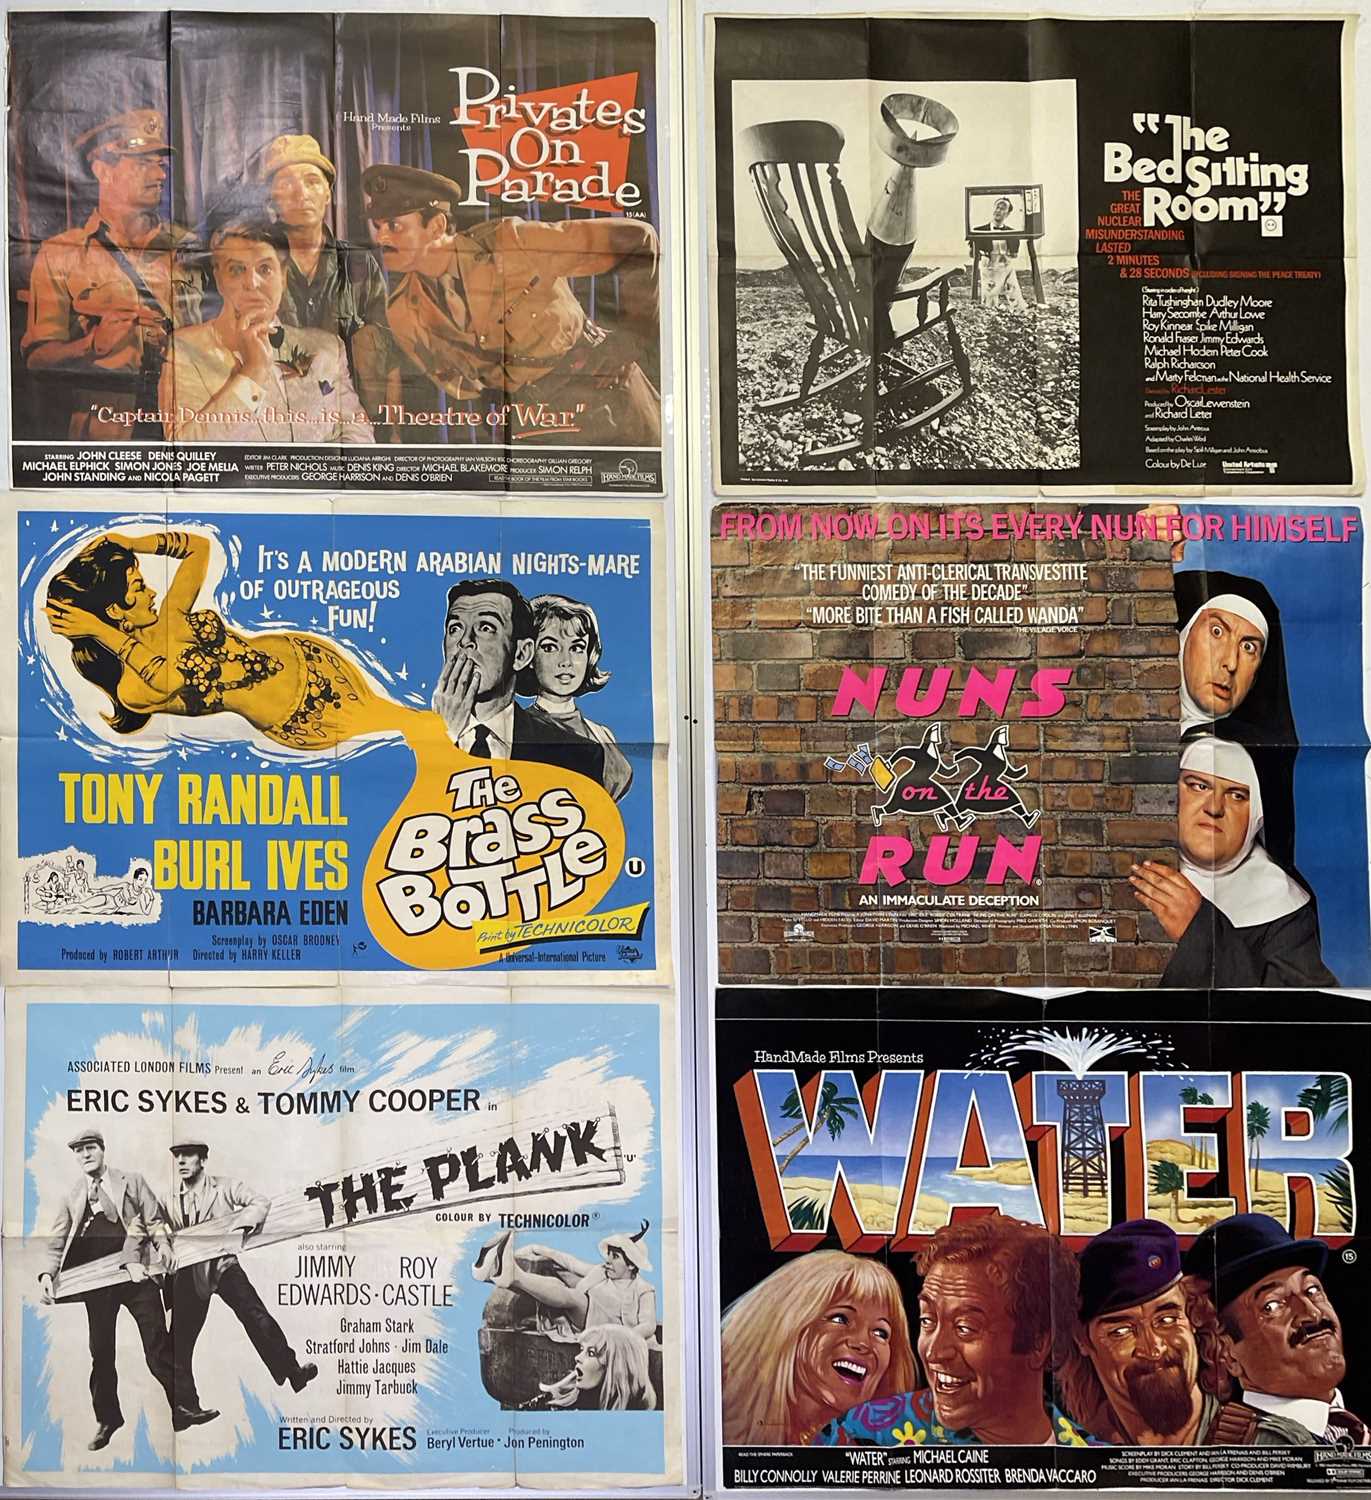 Lot 228 - MIXED FILM ITEMS - POSTERS, LOBBY CARDS AND SIGNED PHOTOS.